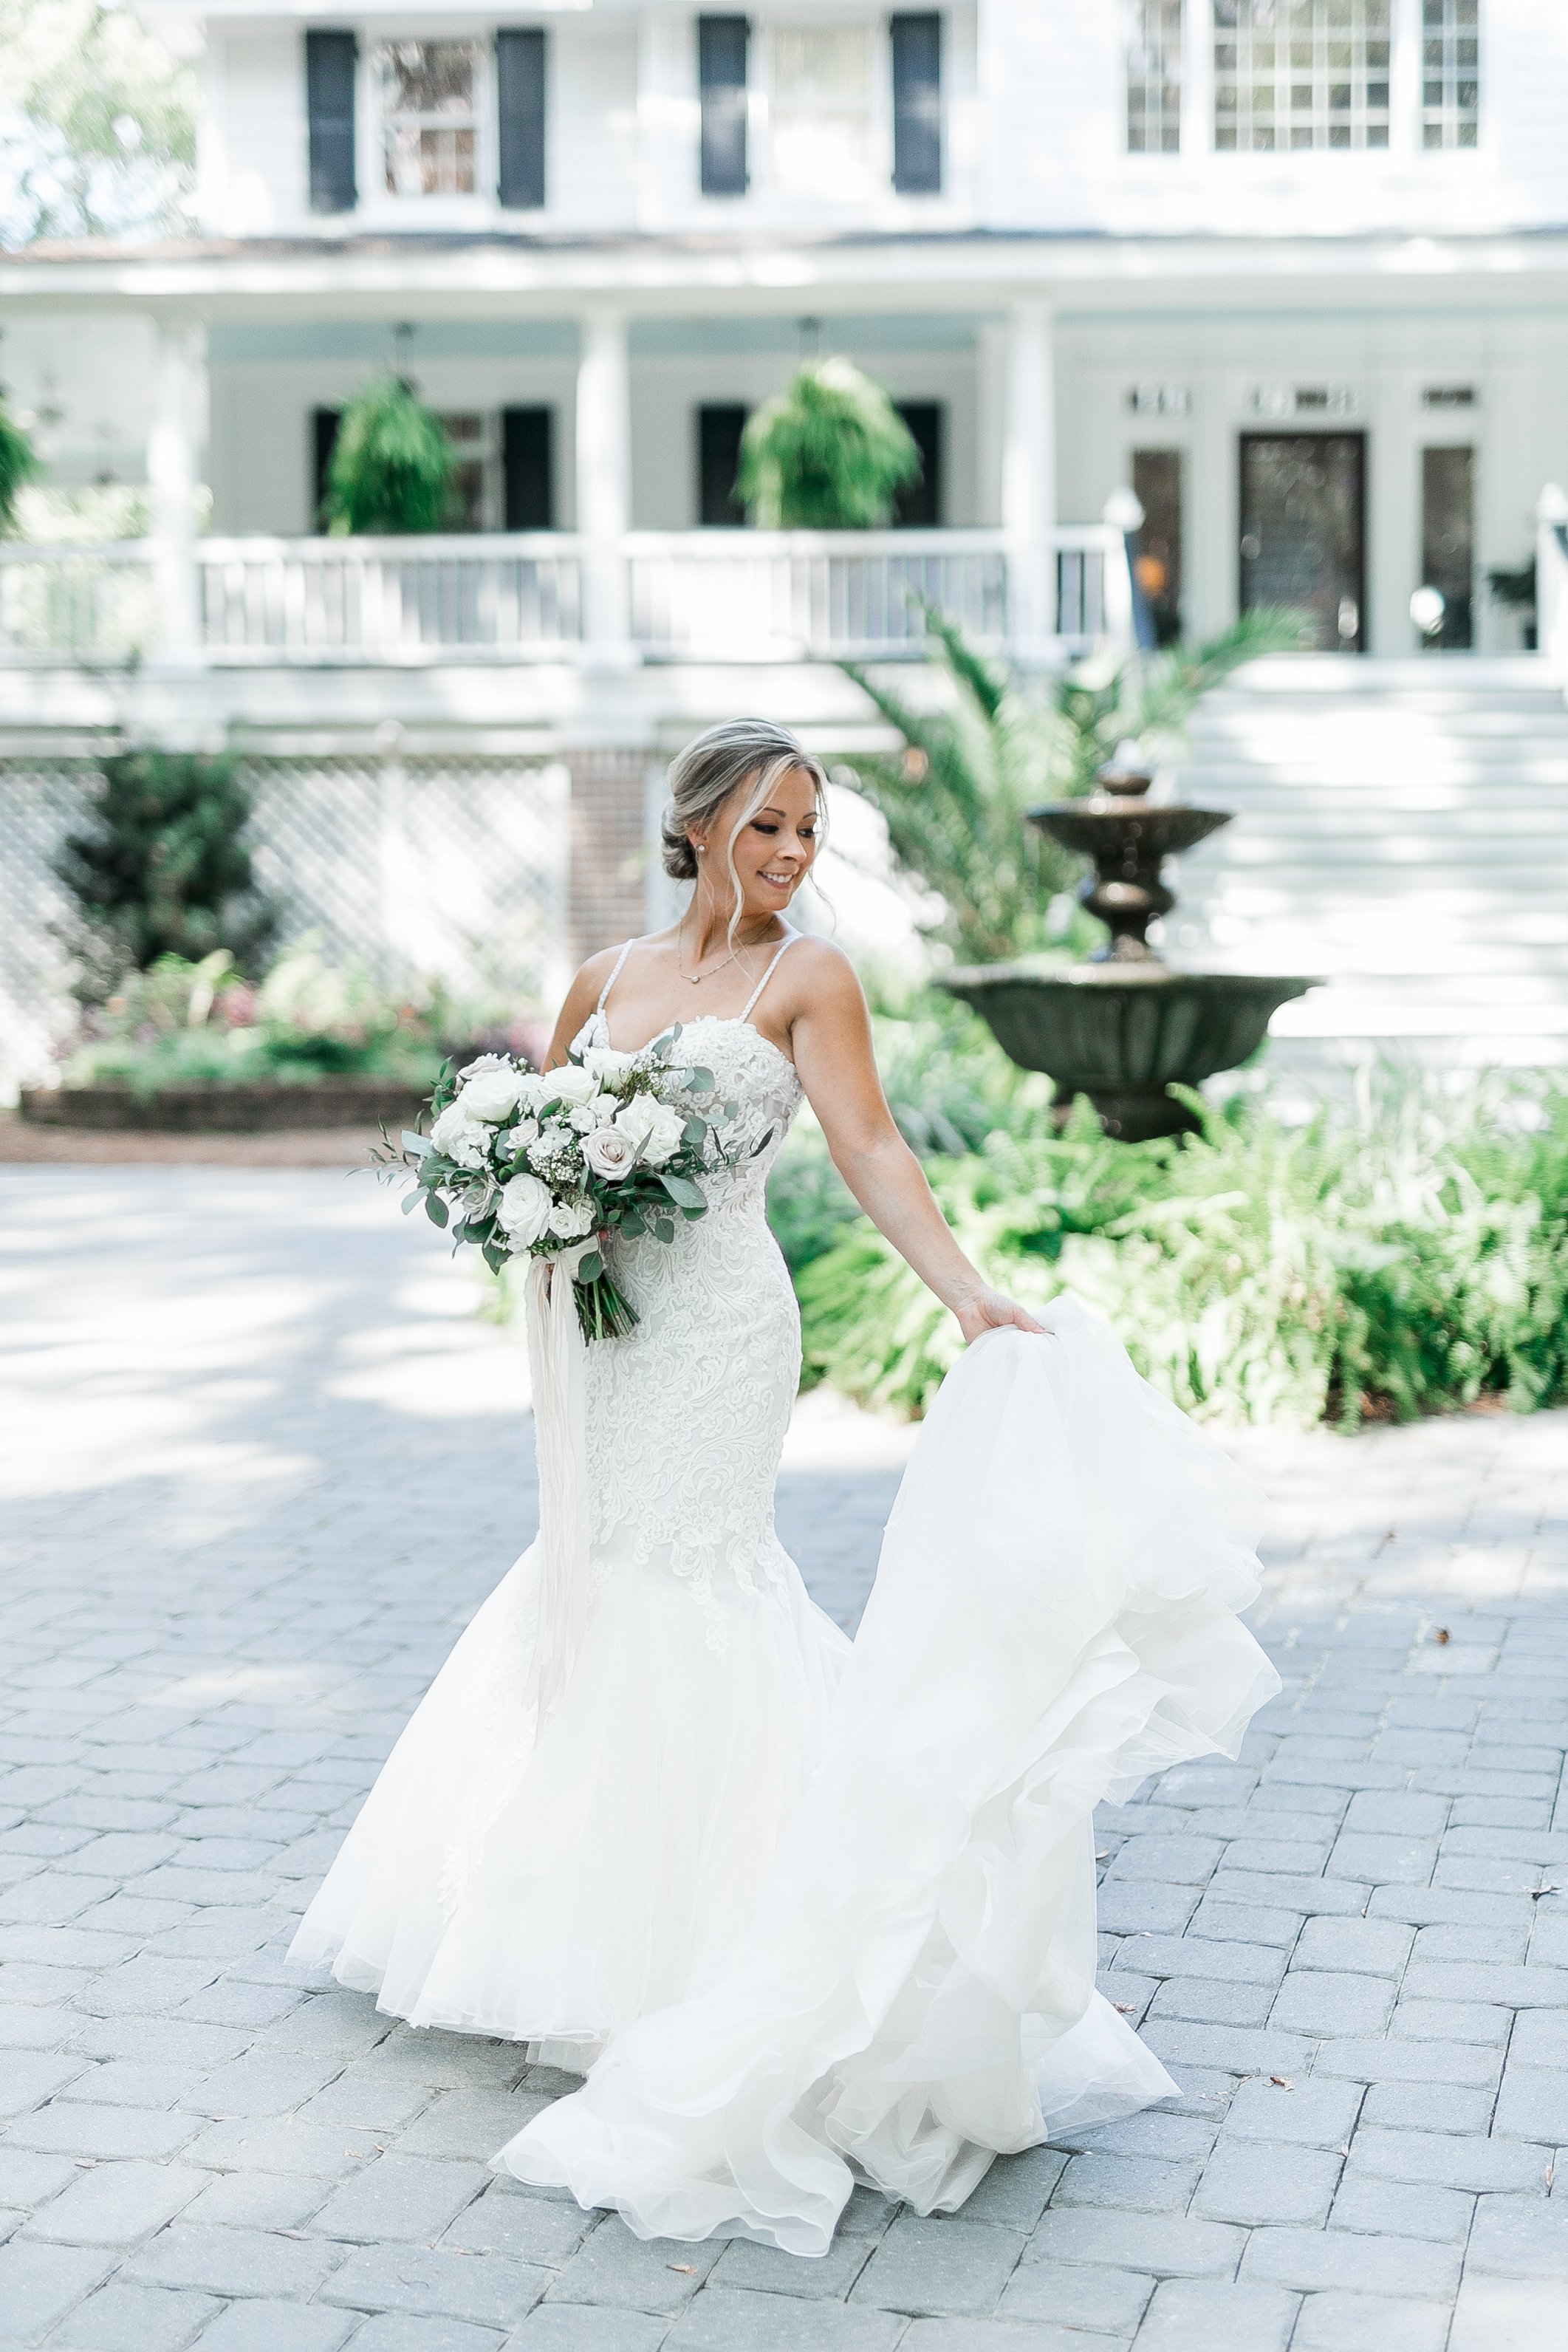 ivory-and-beau-bride-and-florals-wedding-blog-real-bride-real-wedding-savannah-wedding-southern-wedding-mackey-house-alistaire-maggie-sottero-wedding-dress-organic-natural-neutral-wedding-flowers-wedding-florist-savannah-Evan+MerrittWeddingDay_-29.jpg